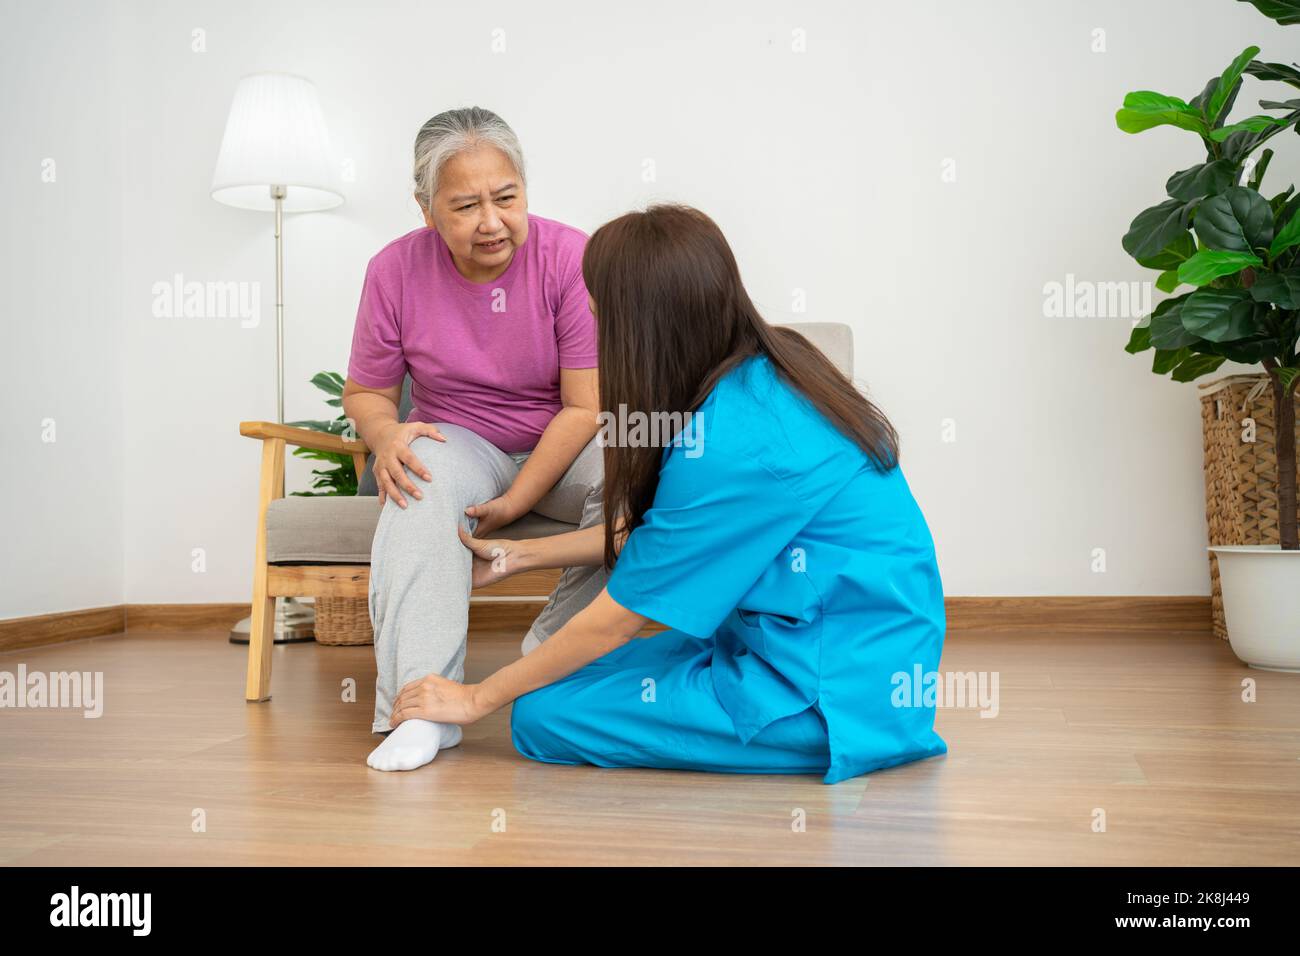 physiotherapist doctor or caregiver helping senior older woman stretching his hamstring and doing thigh or leg rehabilitation in exercise room, Osteoa Stock Photo